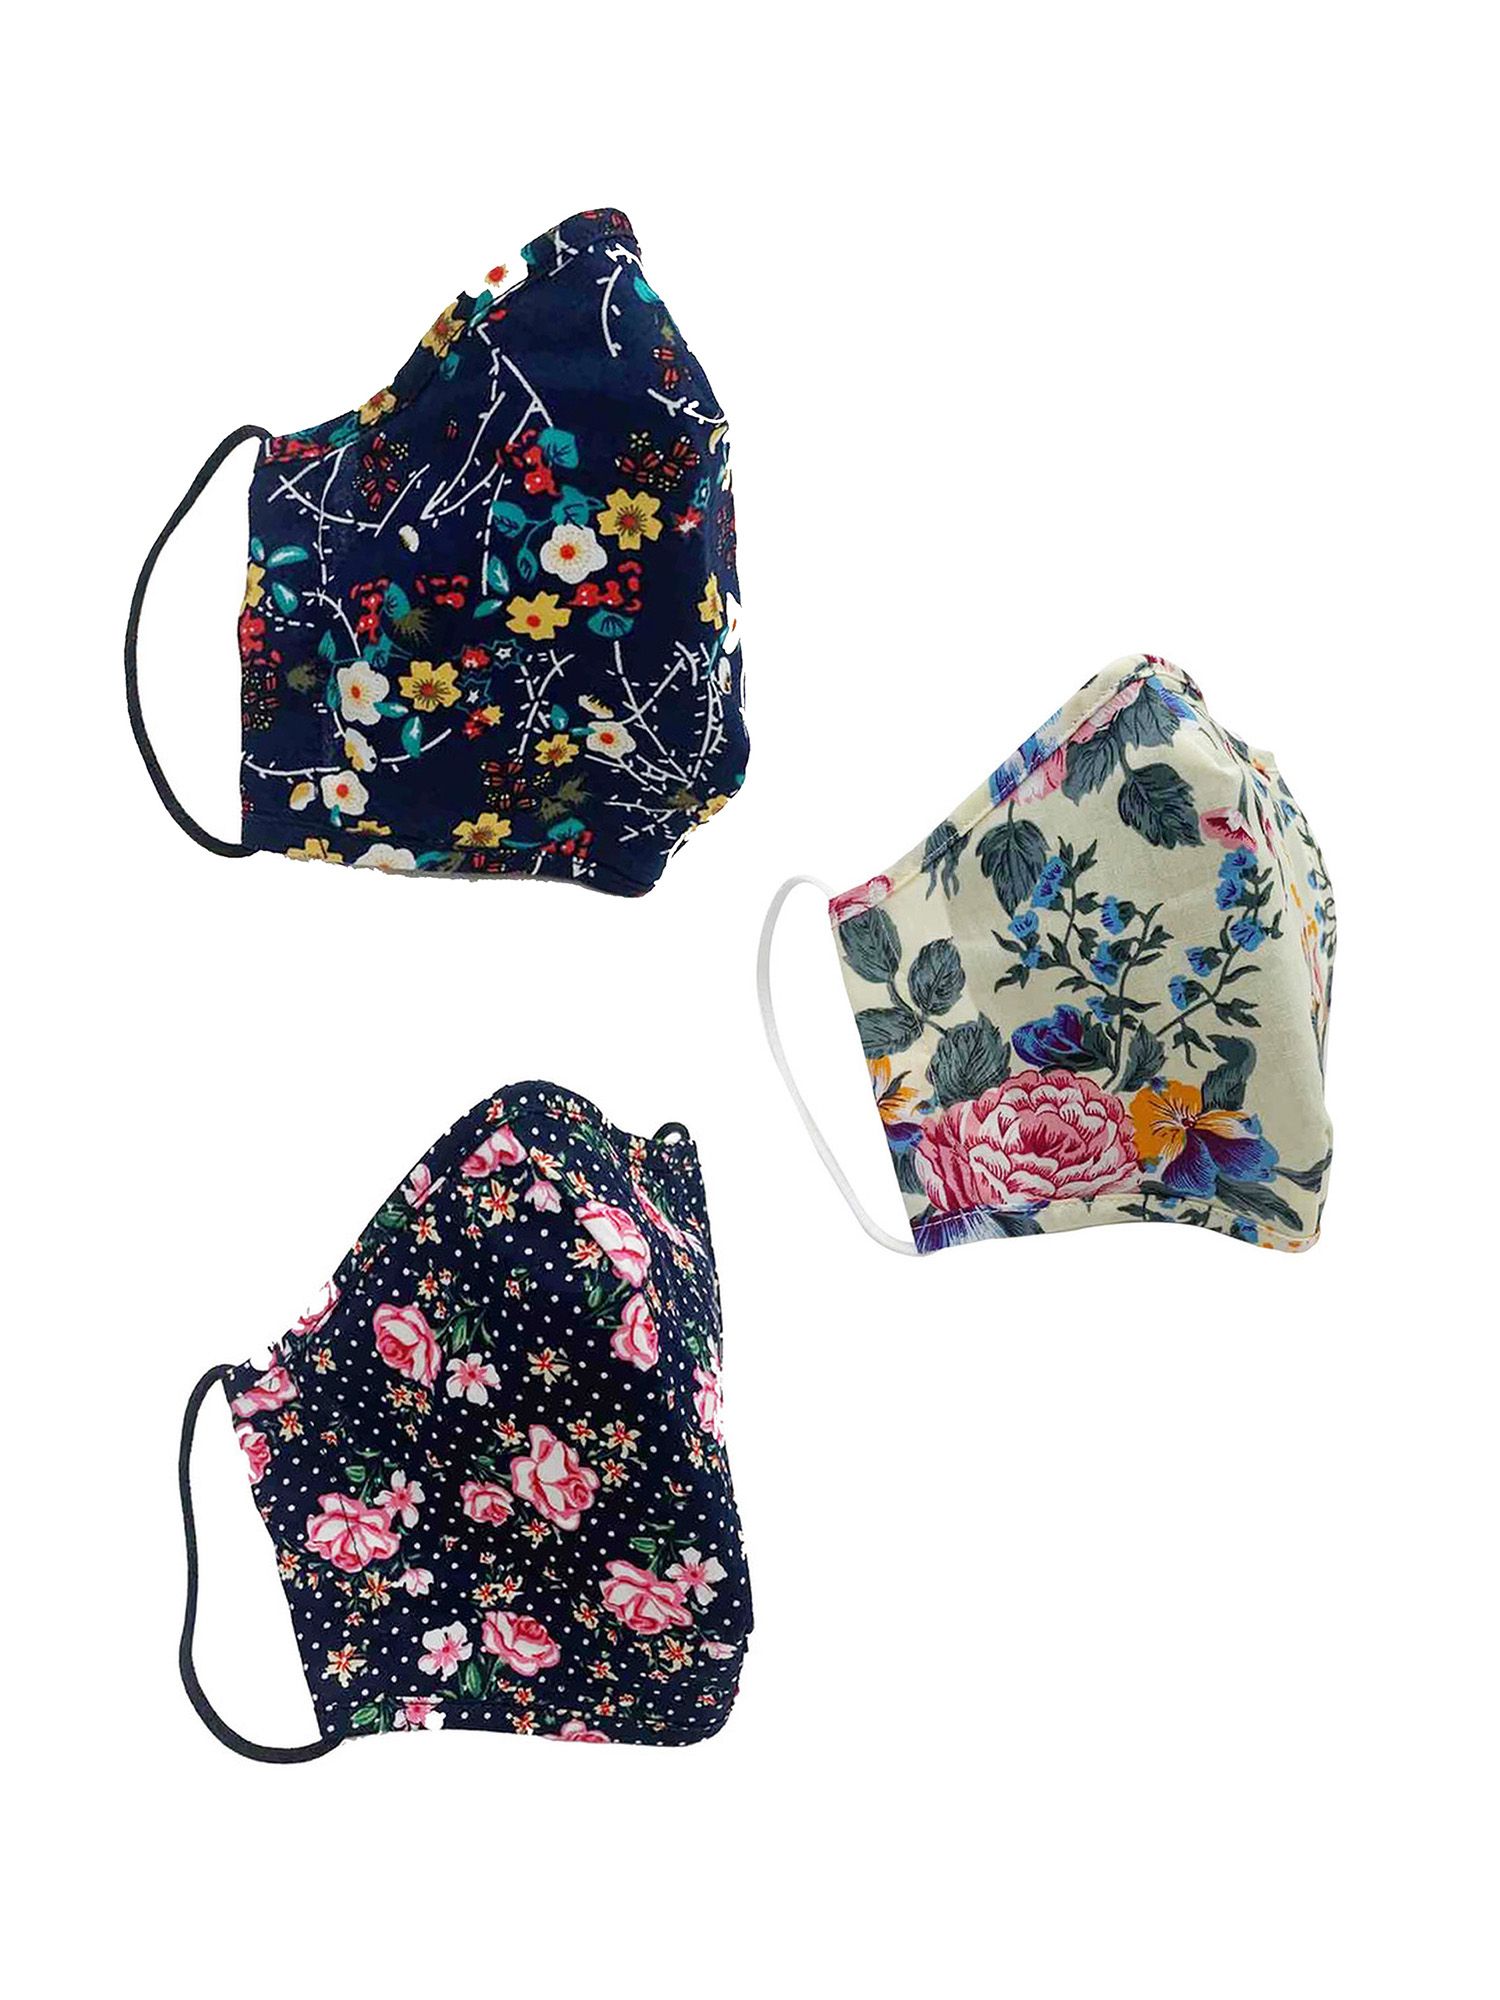 With a choice of six designs, our Floral Face Coverings 6 pack are perfect for switching up your style. Sourced from the ends of our fabric rolls, they are cut from soft cotton to keep you comfortable on every journey. Please remember these are non-medical masks and not PPE. Wash your hands before and after putting on the covering. One Poundfrom each covering is donated to Sufra, a charity that supports and provides food for people in extreme poverty.